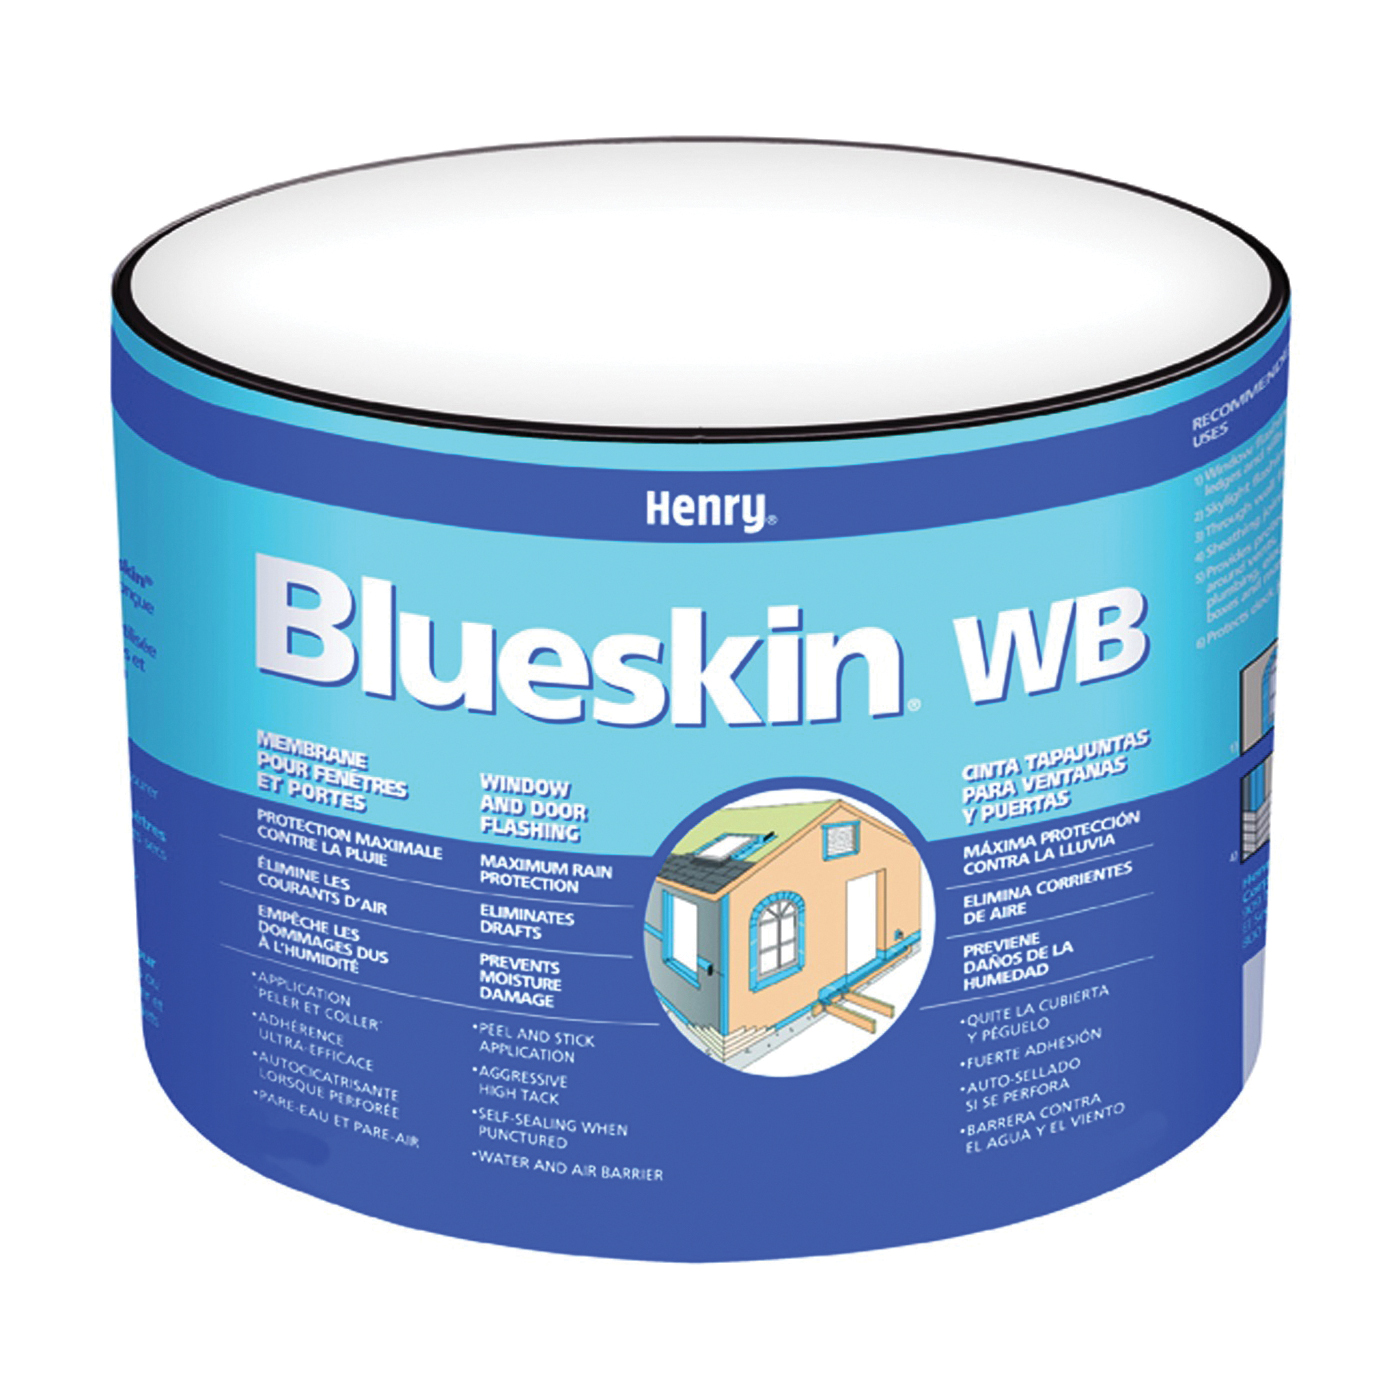 WB25 HE201WB954 Window and Door Flashing, 75 ft L, 9 in W, Paper, Blue, Self-Adhesive